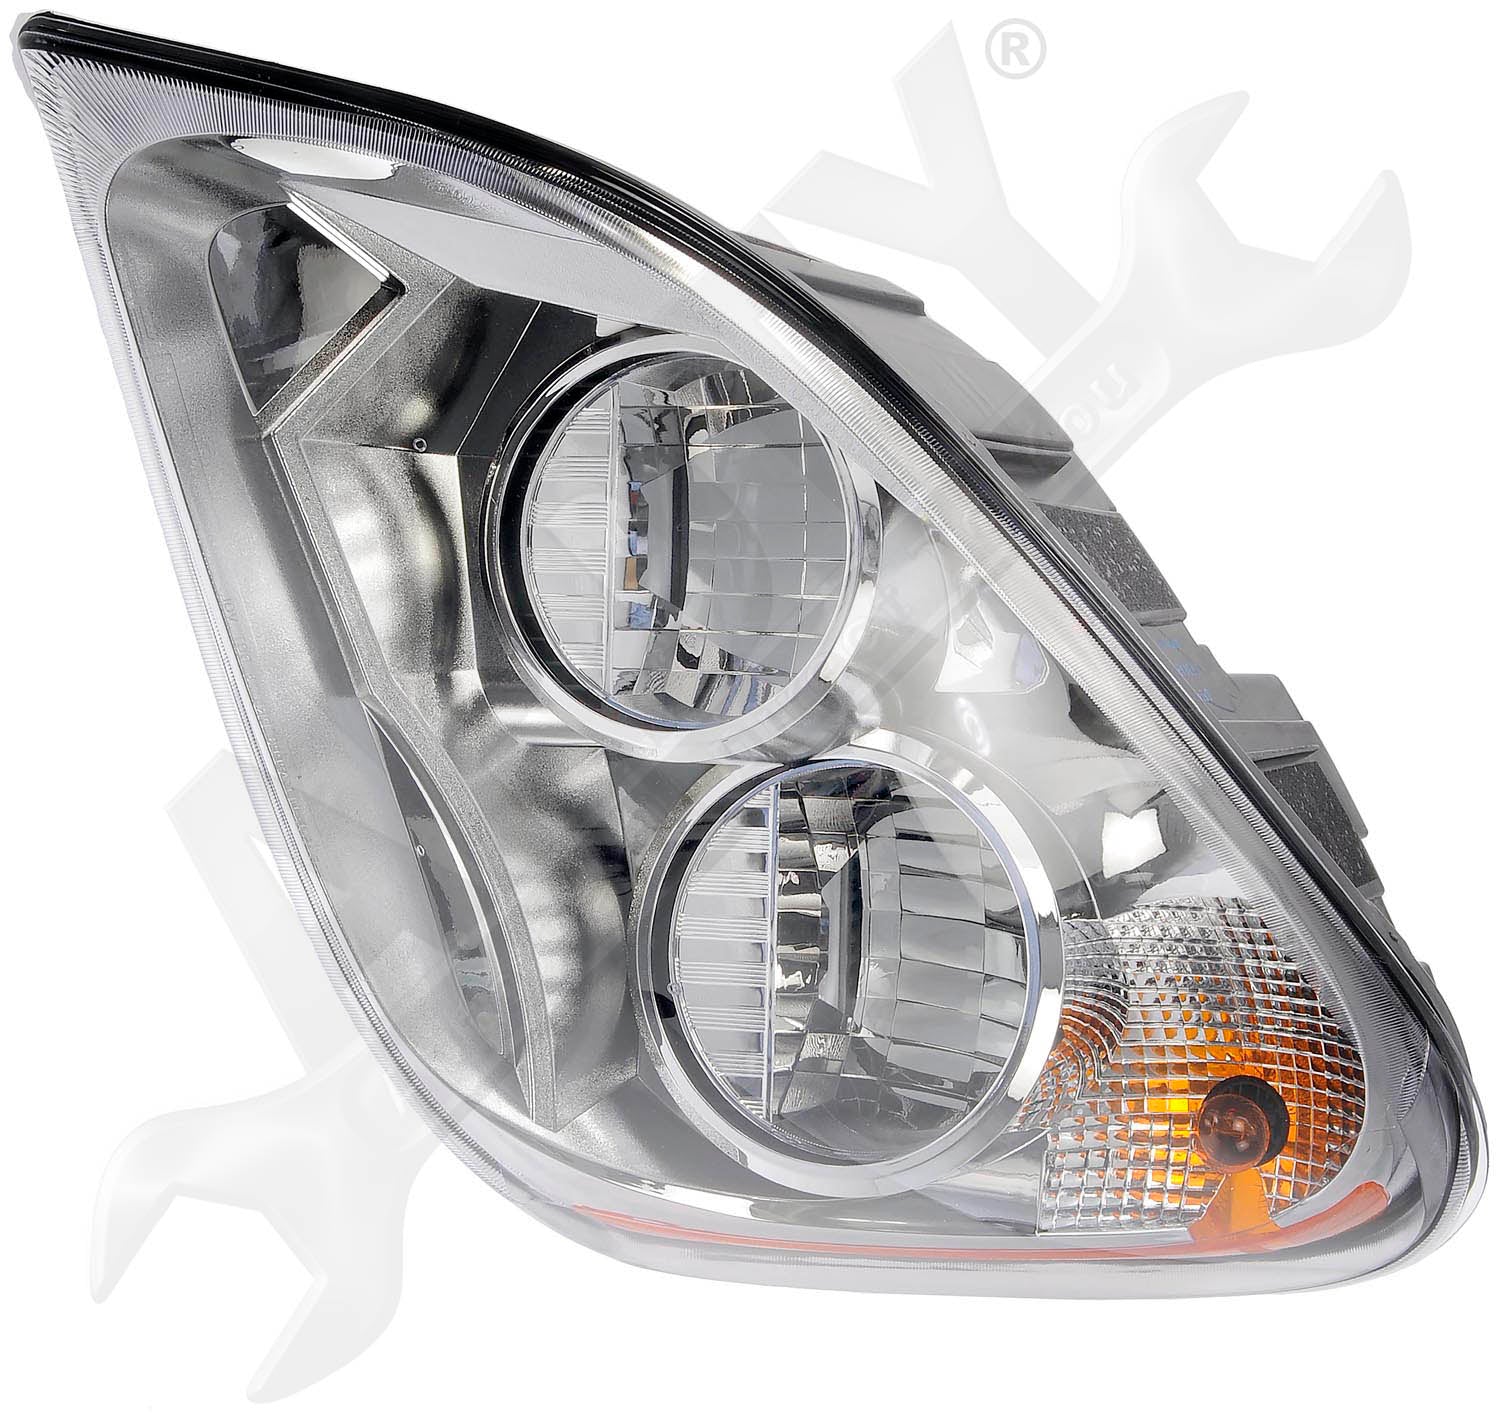 APDTY, APDTY 144807 LED Headlight - Left Side Replaces TL 27601C